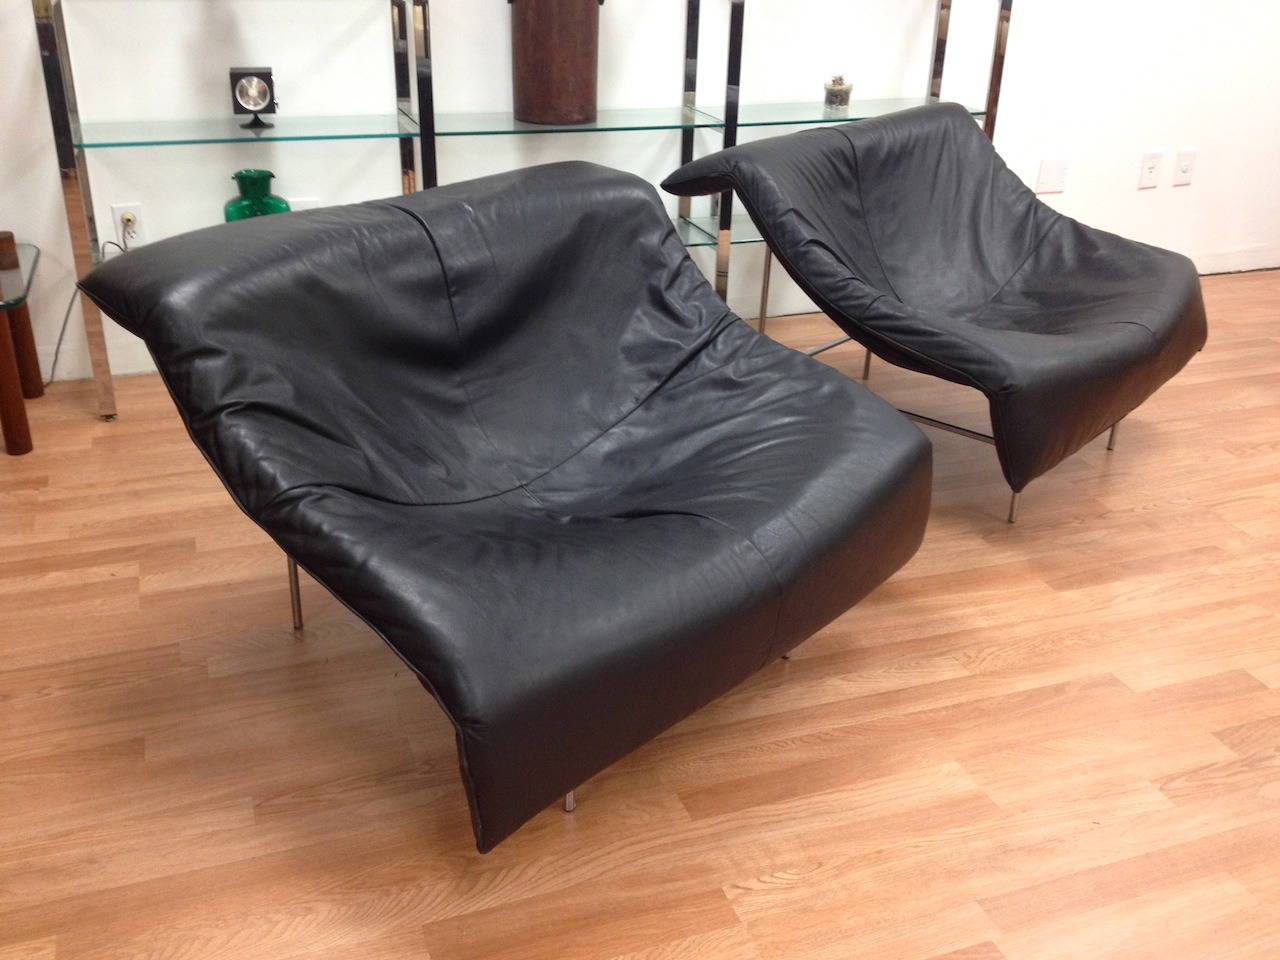 Rare pair of Montis leather butterfly lounge chairs by Gerard Van Den Berg. Exceptionally comfortable chairs. Leather is in very nice original condition with a minor age appropriate patina. Chairs retain Montis labels.